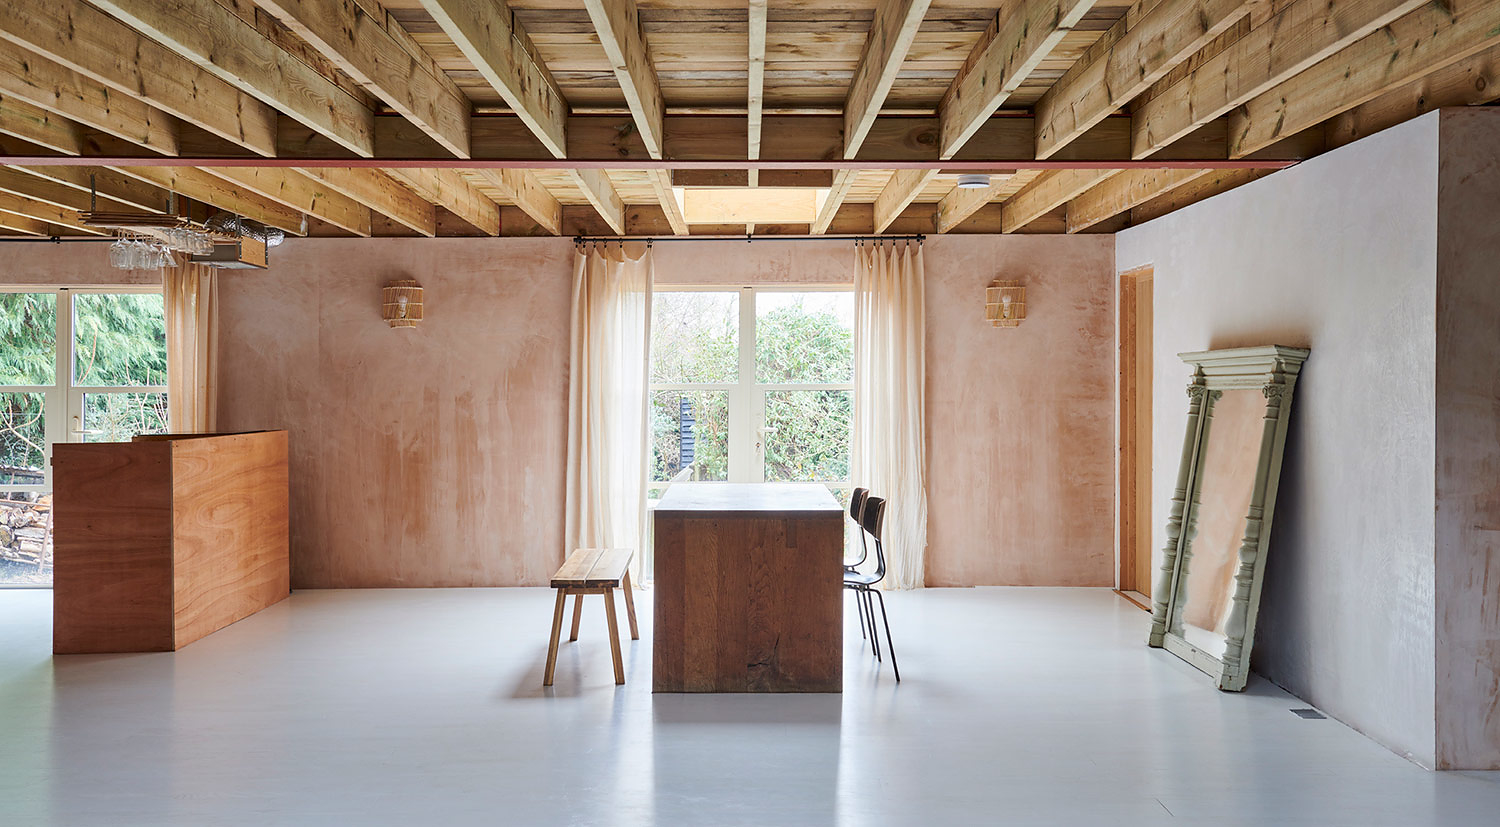 Large open plan space with exposed beams and ceiling rafters in a single storey house near Rye